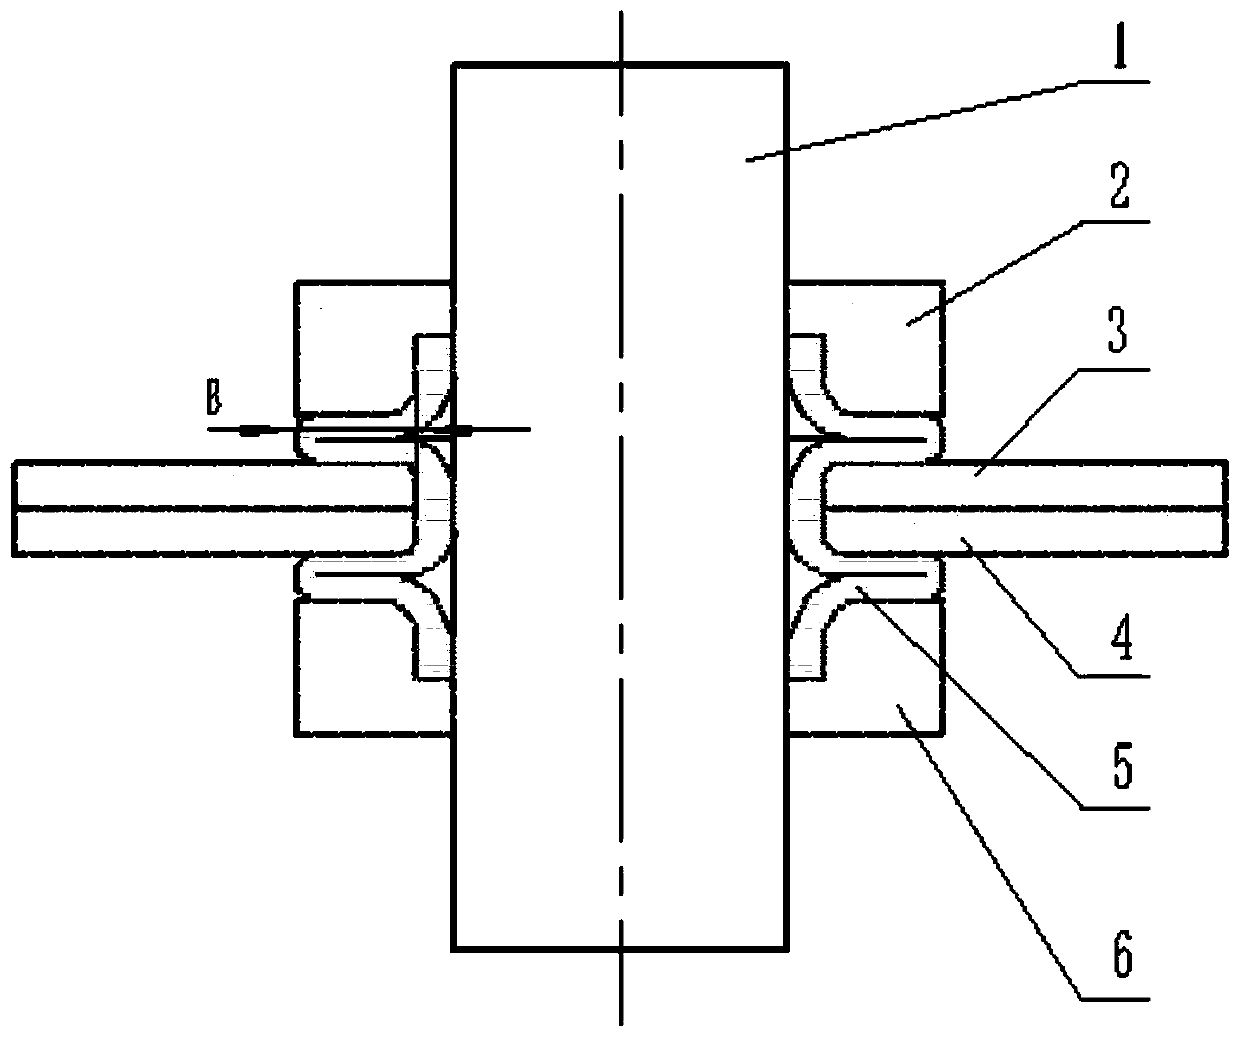 Method for achieving circular ring connection by utilizing wrinkling of metal pipes